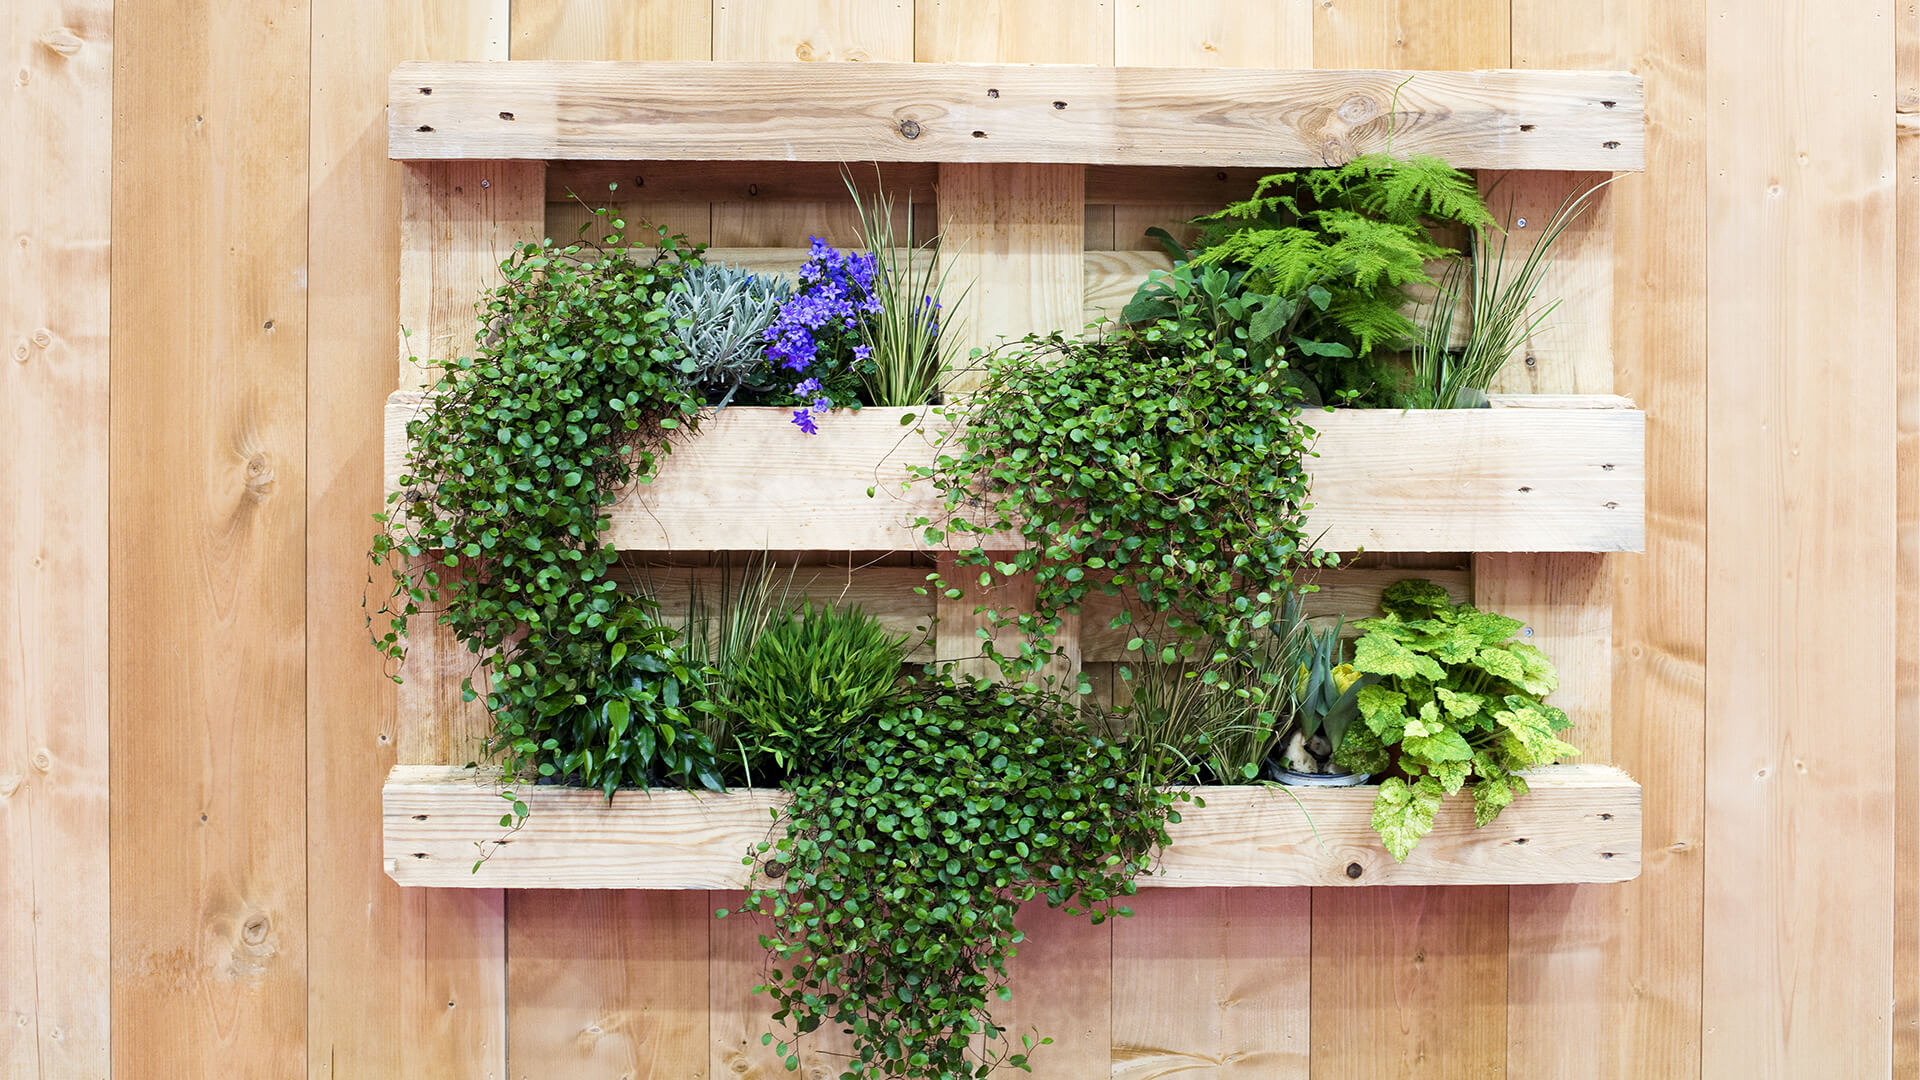 Green plants growing from a wall mounted upcycled wooden pallet